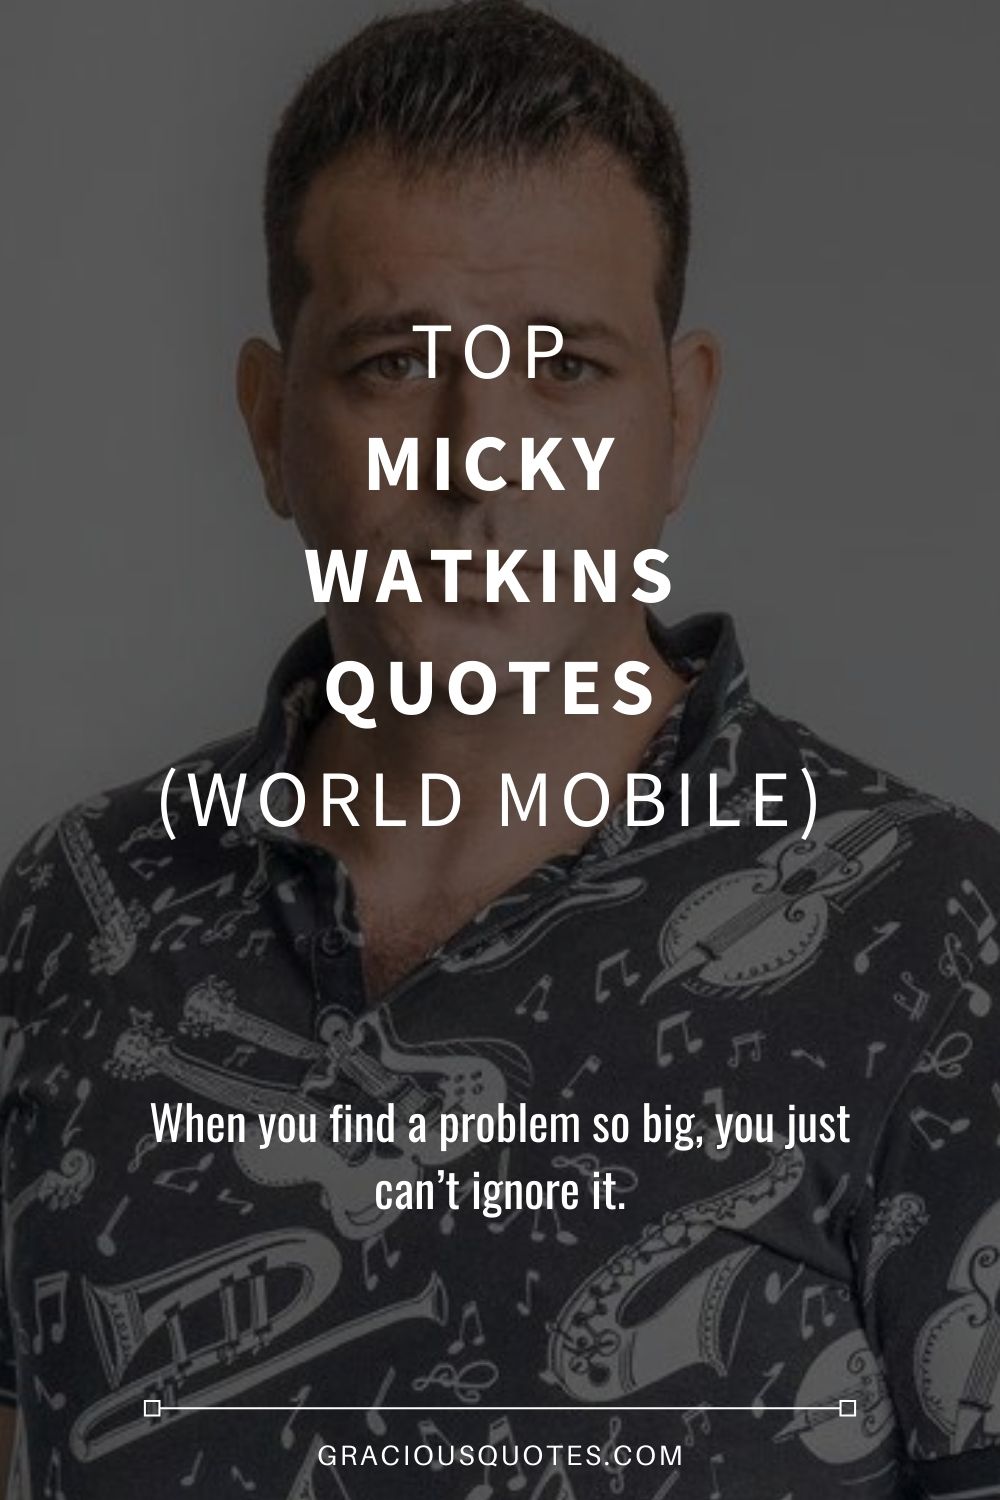 Top Micky Watkins Quotes (WORLD MOBILE) - Gracious Quotes